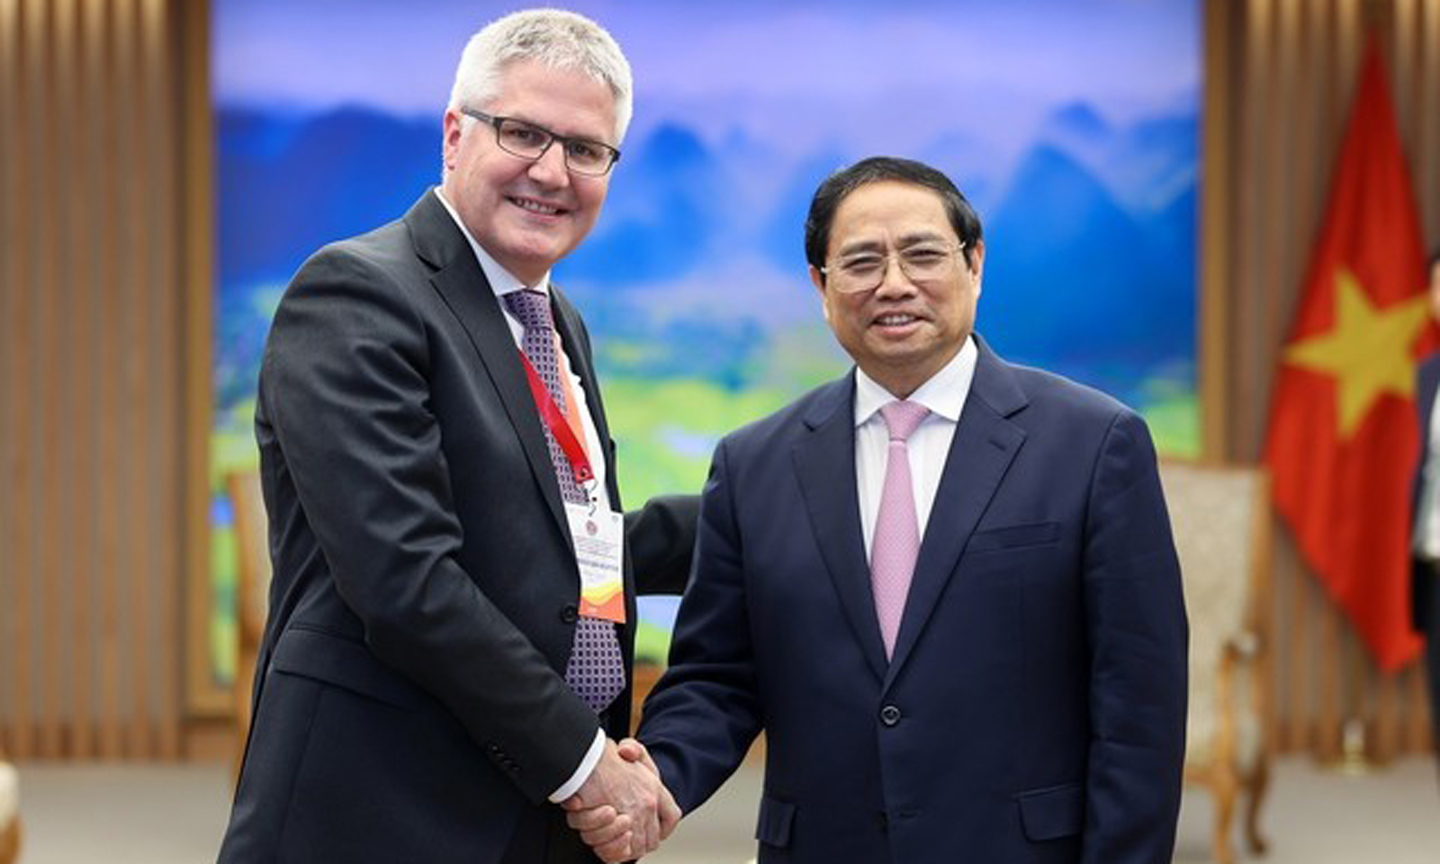 Prime Minister Pham Minh Chinh (R) and Director of the Swiss Federal Office for Agriculture (FOAG) Christian Hofer at their meeting in Hanoi on April 24. (Photo: VGP).